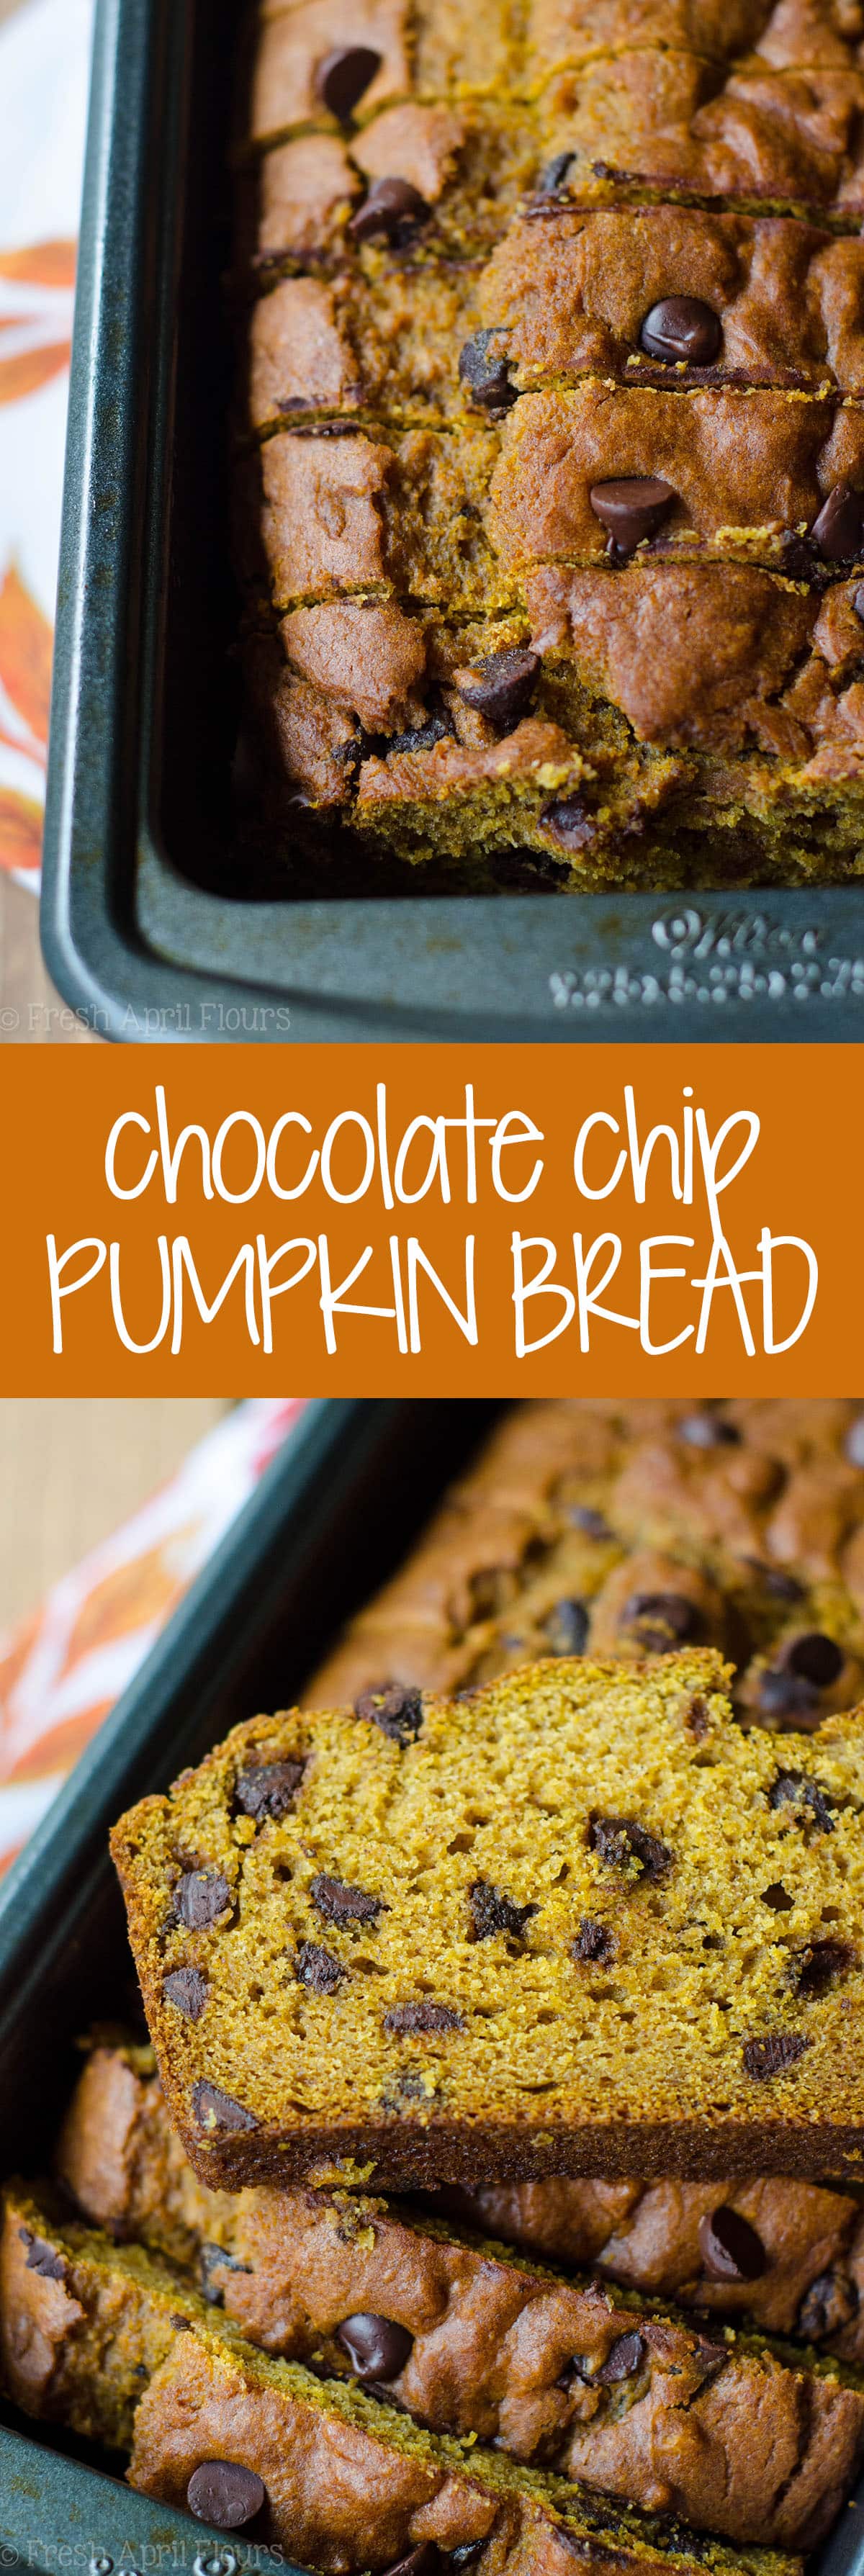 Chocolate Chip Pumpkin Quick Bread: An easy bread spiced with real pumpkin and spices and sweetened with brown sugar and chocolate chips.  via @frshaprilflours